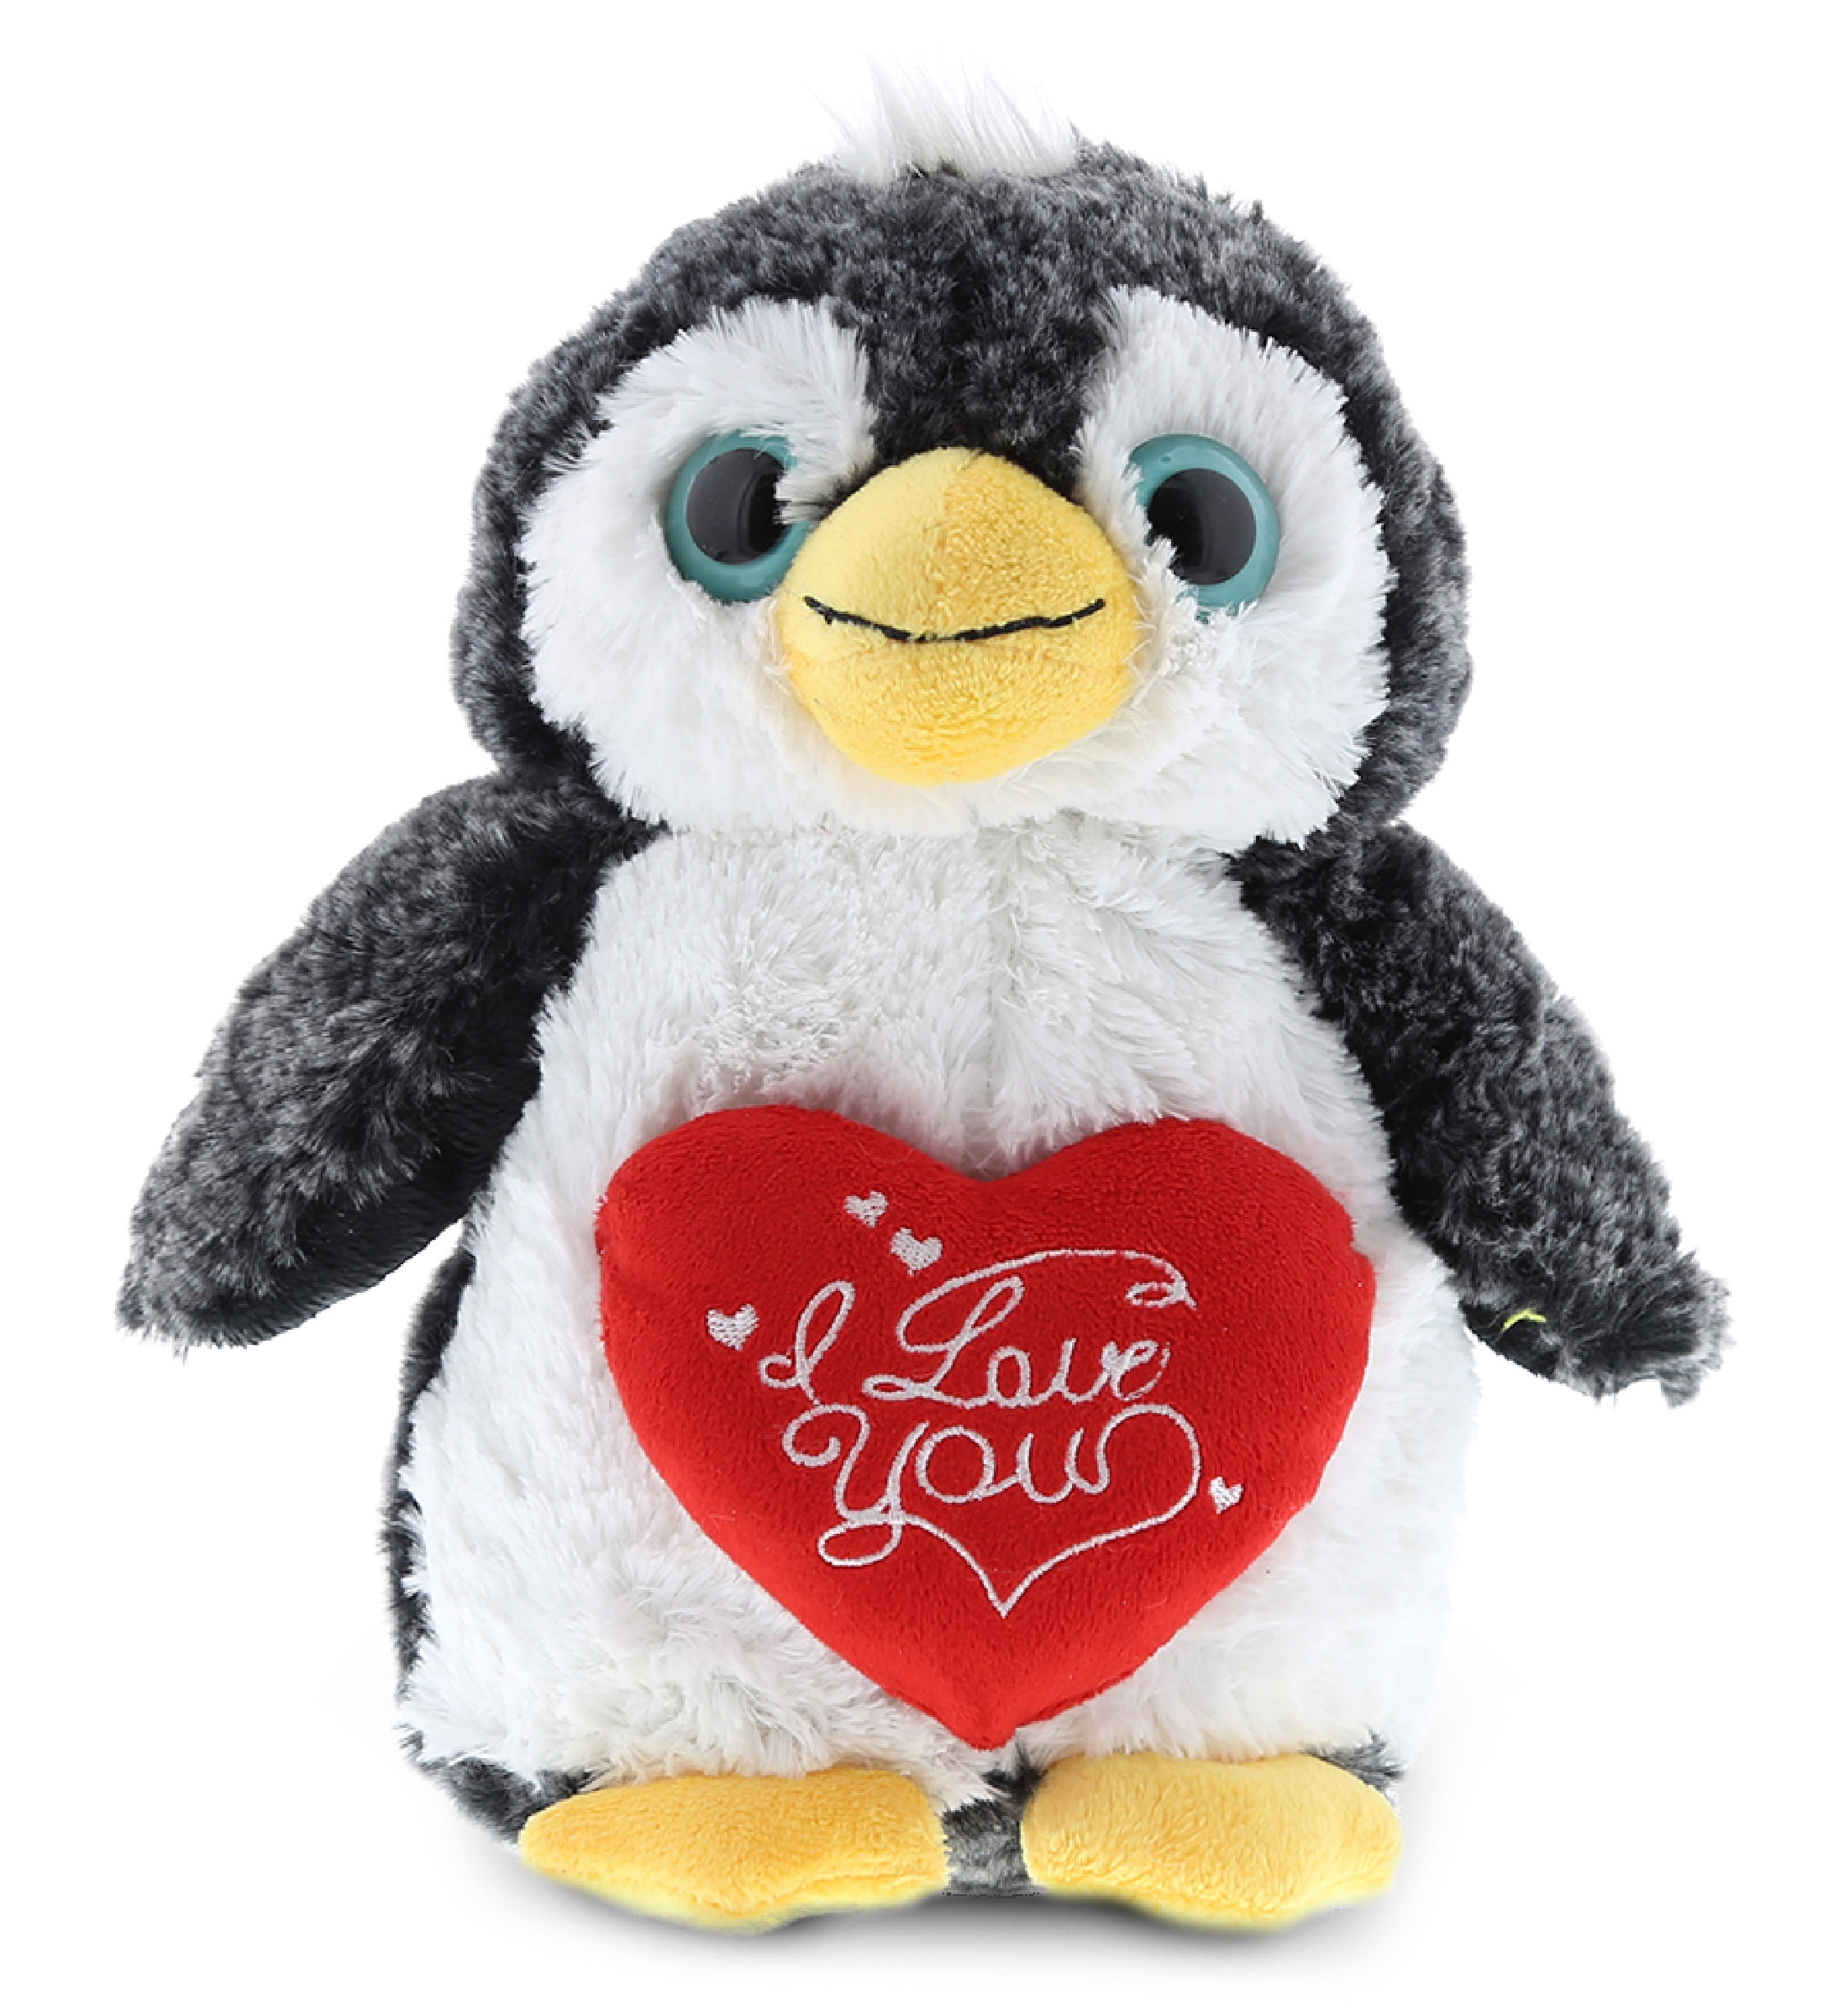 Soft Penguin Stuff Plush Doll Gift for Kids Girls Boys Girlfriend Valentines Day Gifts Throw Pillow Blue,9.8in/25cm Plushies Penguin Stuffed Animal Toys 